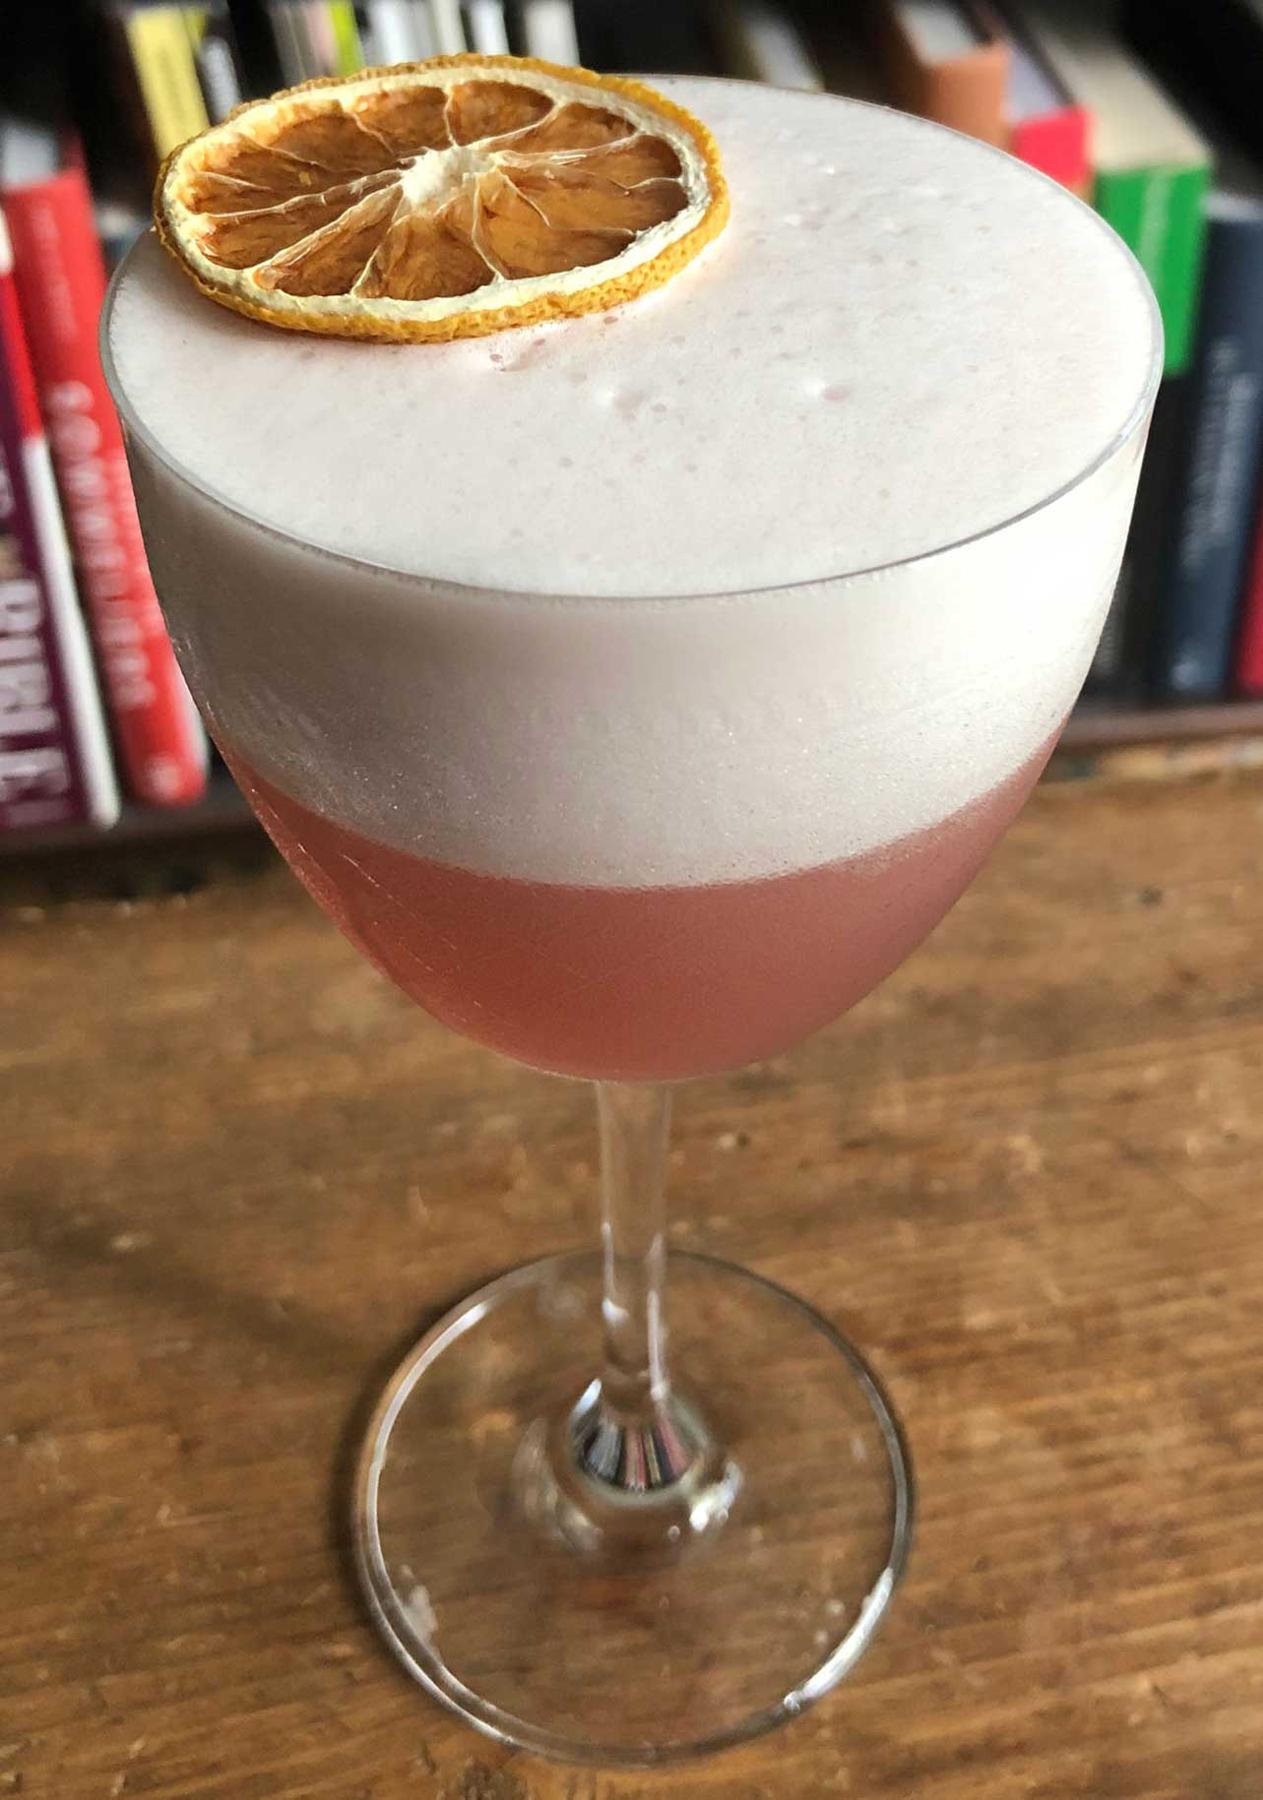 An example of the Rosa Sour, the mixed drink (drink) featuring Cocchi Americano Rosa, egg white, lemon juice, simple syrup, and lemon twist; photo by Lee Edwards